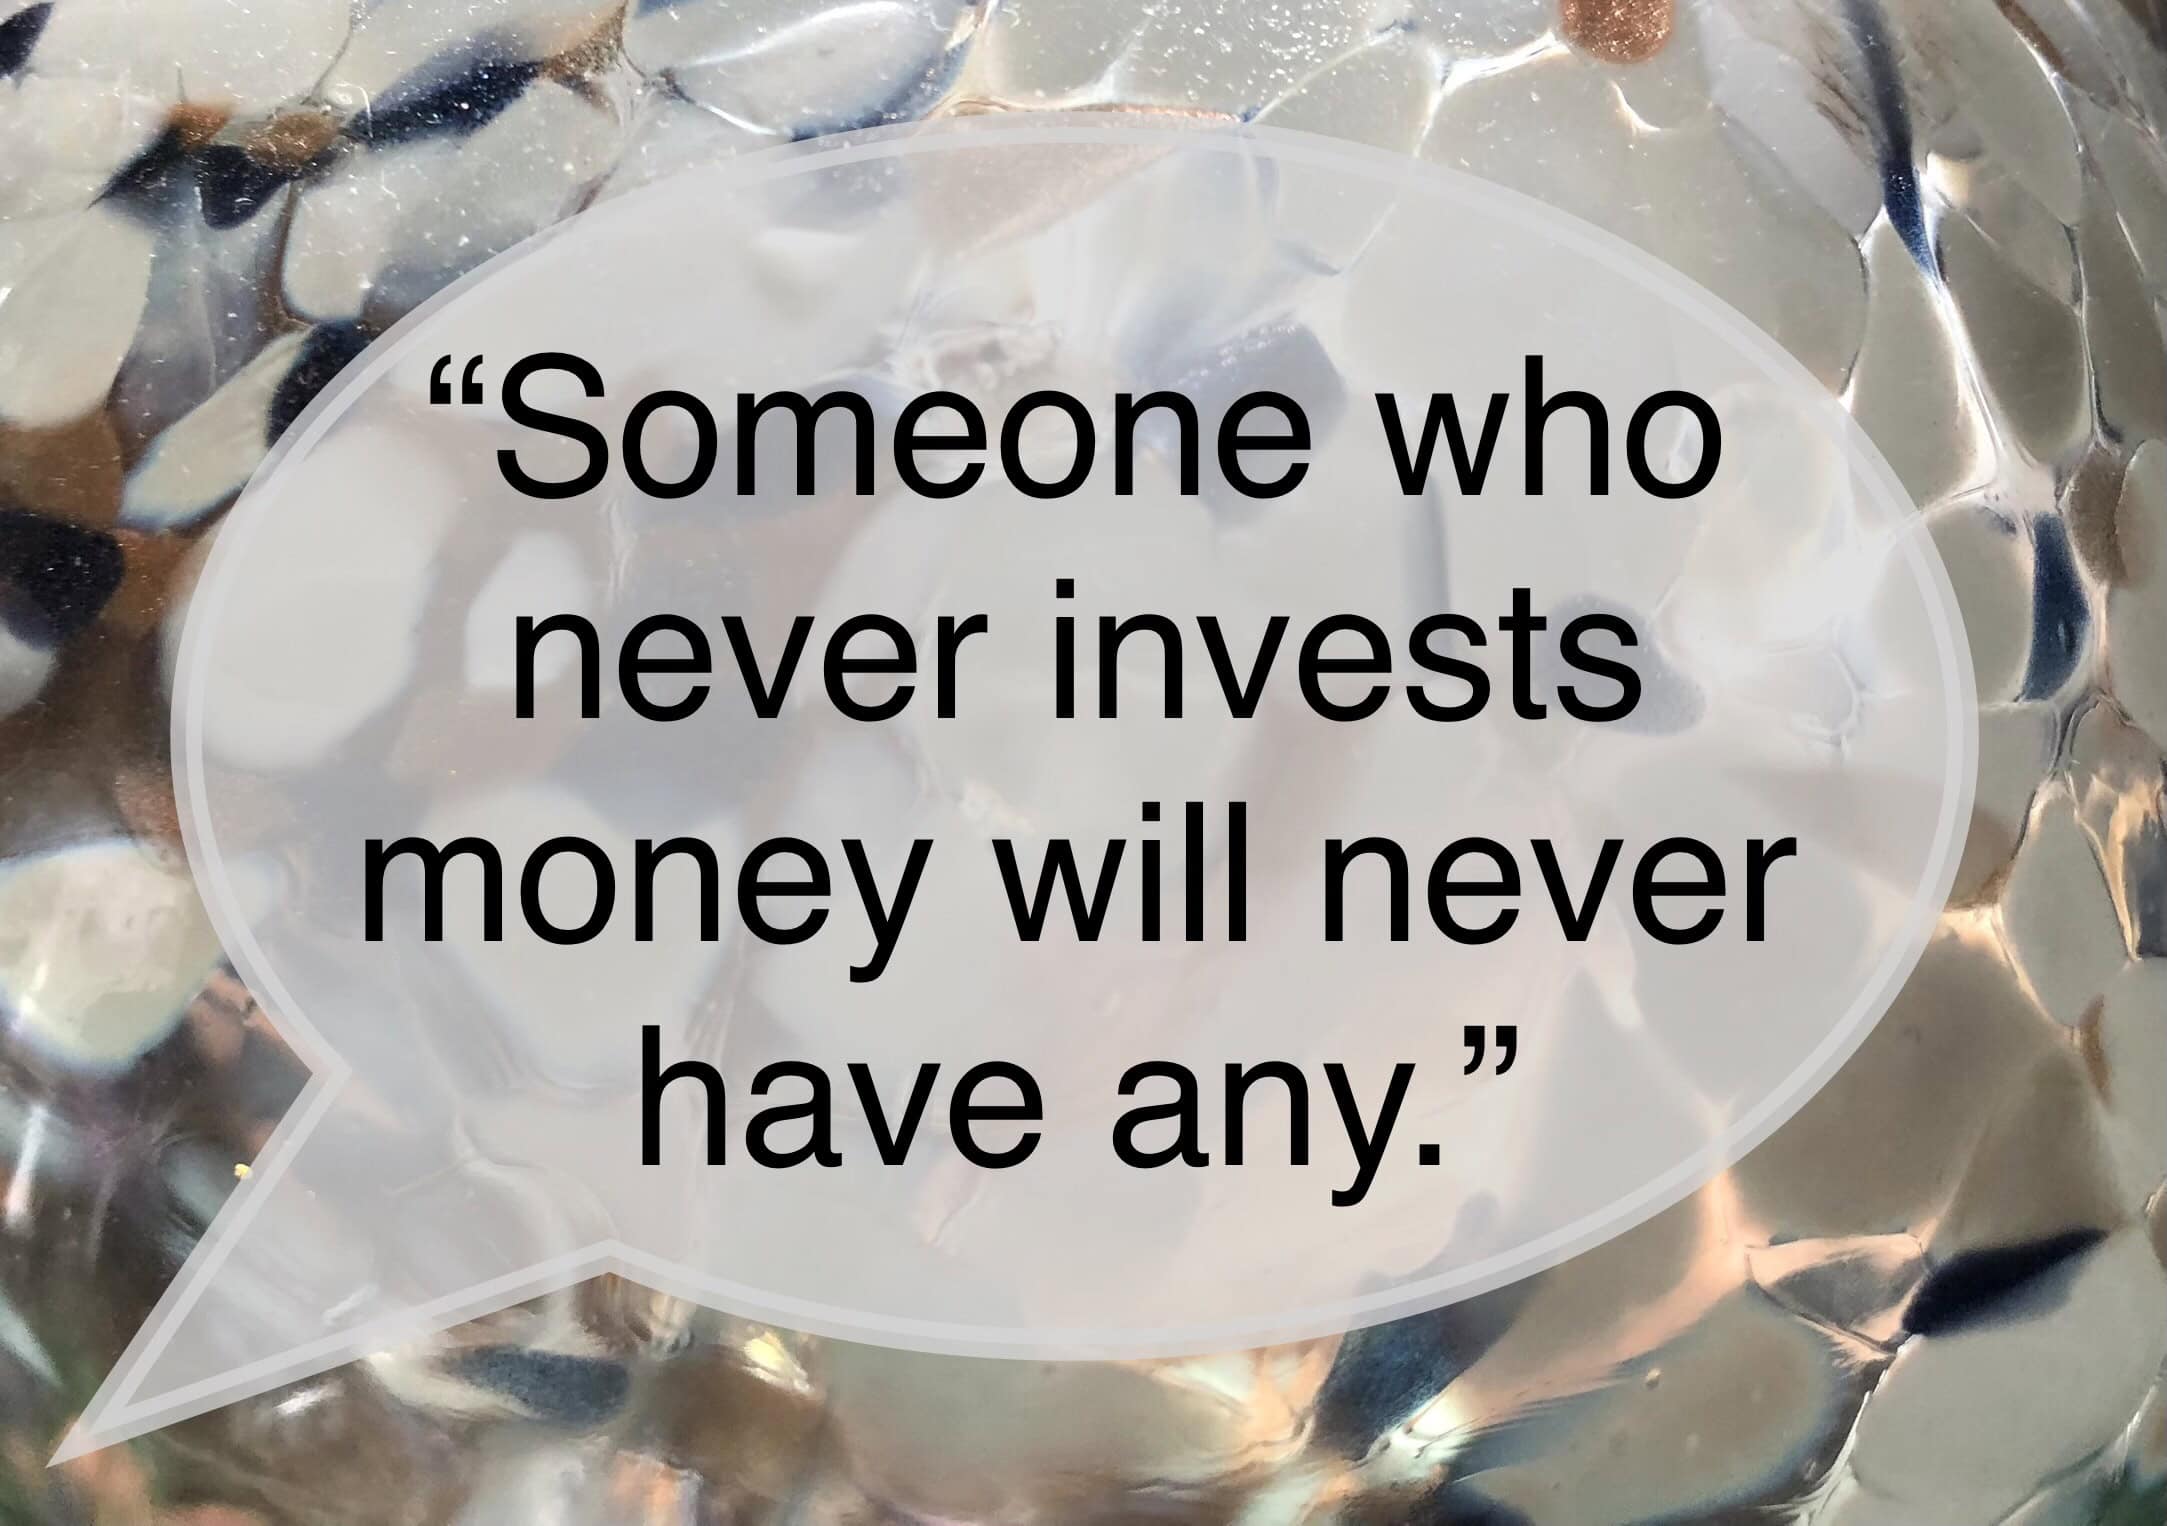 <ul> <li>Someone who never invests money will never have any. –<a href="https://247wallst.com/investing/2024/04/08/11-dave-ramsey-quotes-every-30-year-old-needs-to-hear/?utm_source=msn&utm_medium=referral&utm_campaign=msn&utm_content=11-dave-ramsey-quotes-every-30-year-old-needs-to-hear&wsrlui=213885761">Dave Ramsey</a></li> </ul> <p>Agree with this? Hit the Thumbs Up button above. Disagree? Let us know in the comments with what you'd change.</p>